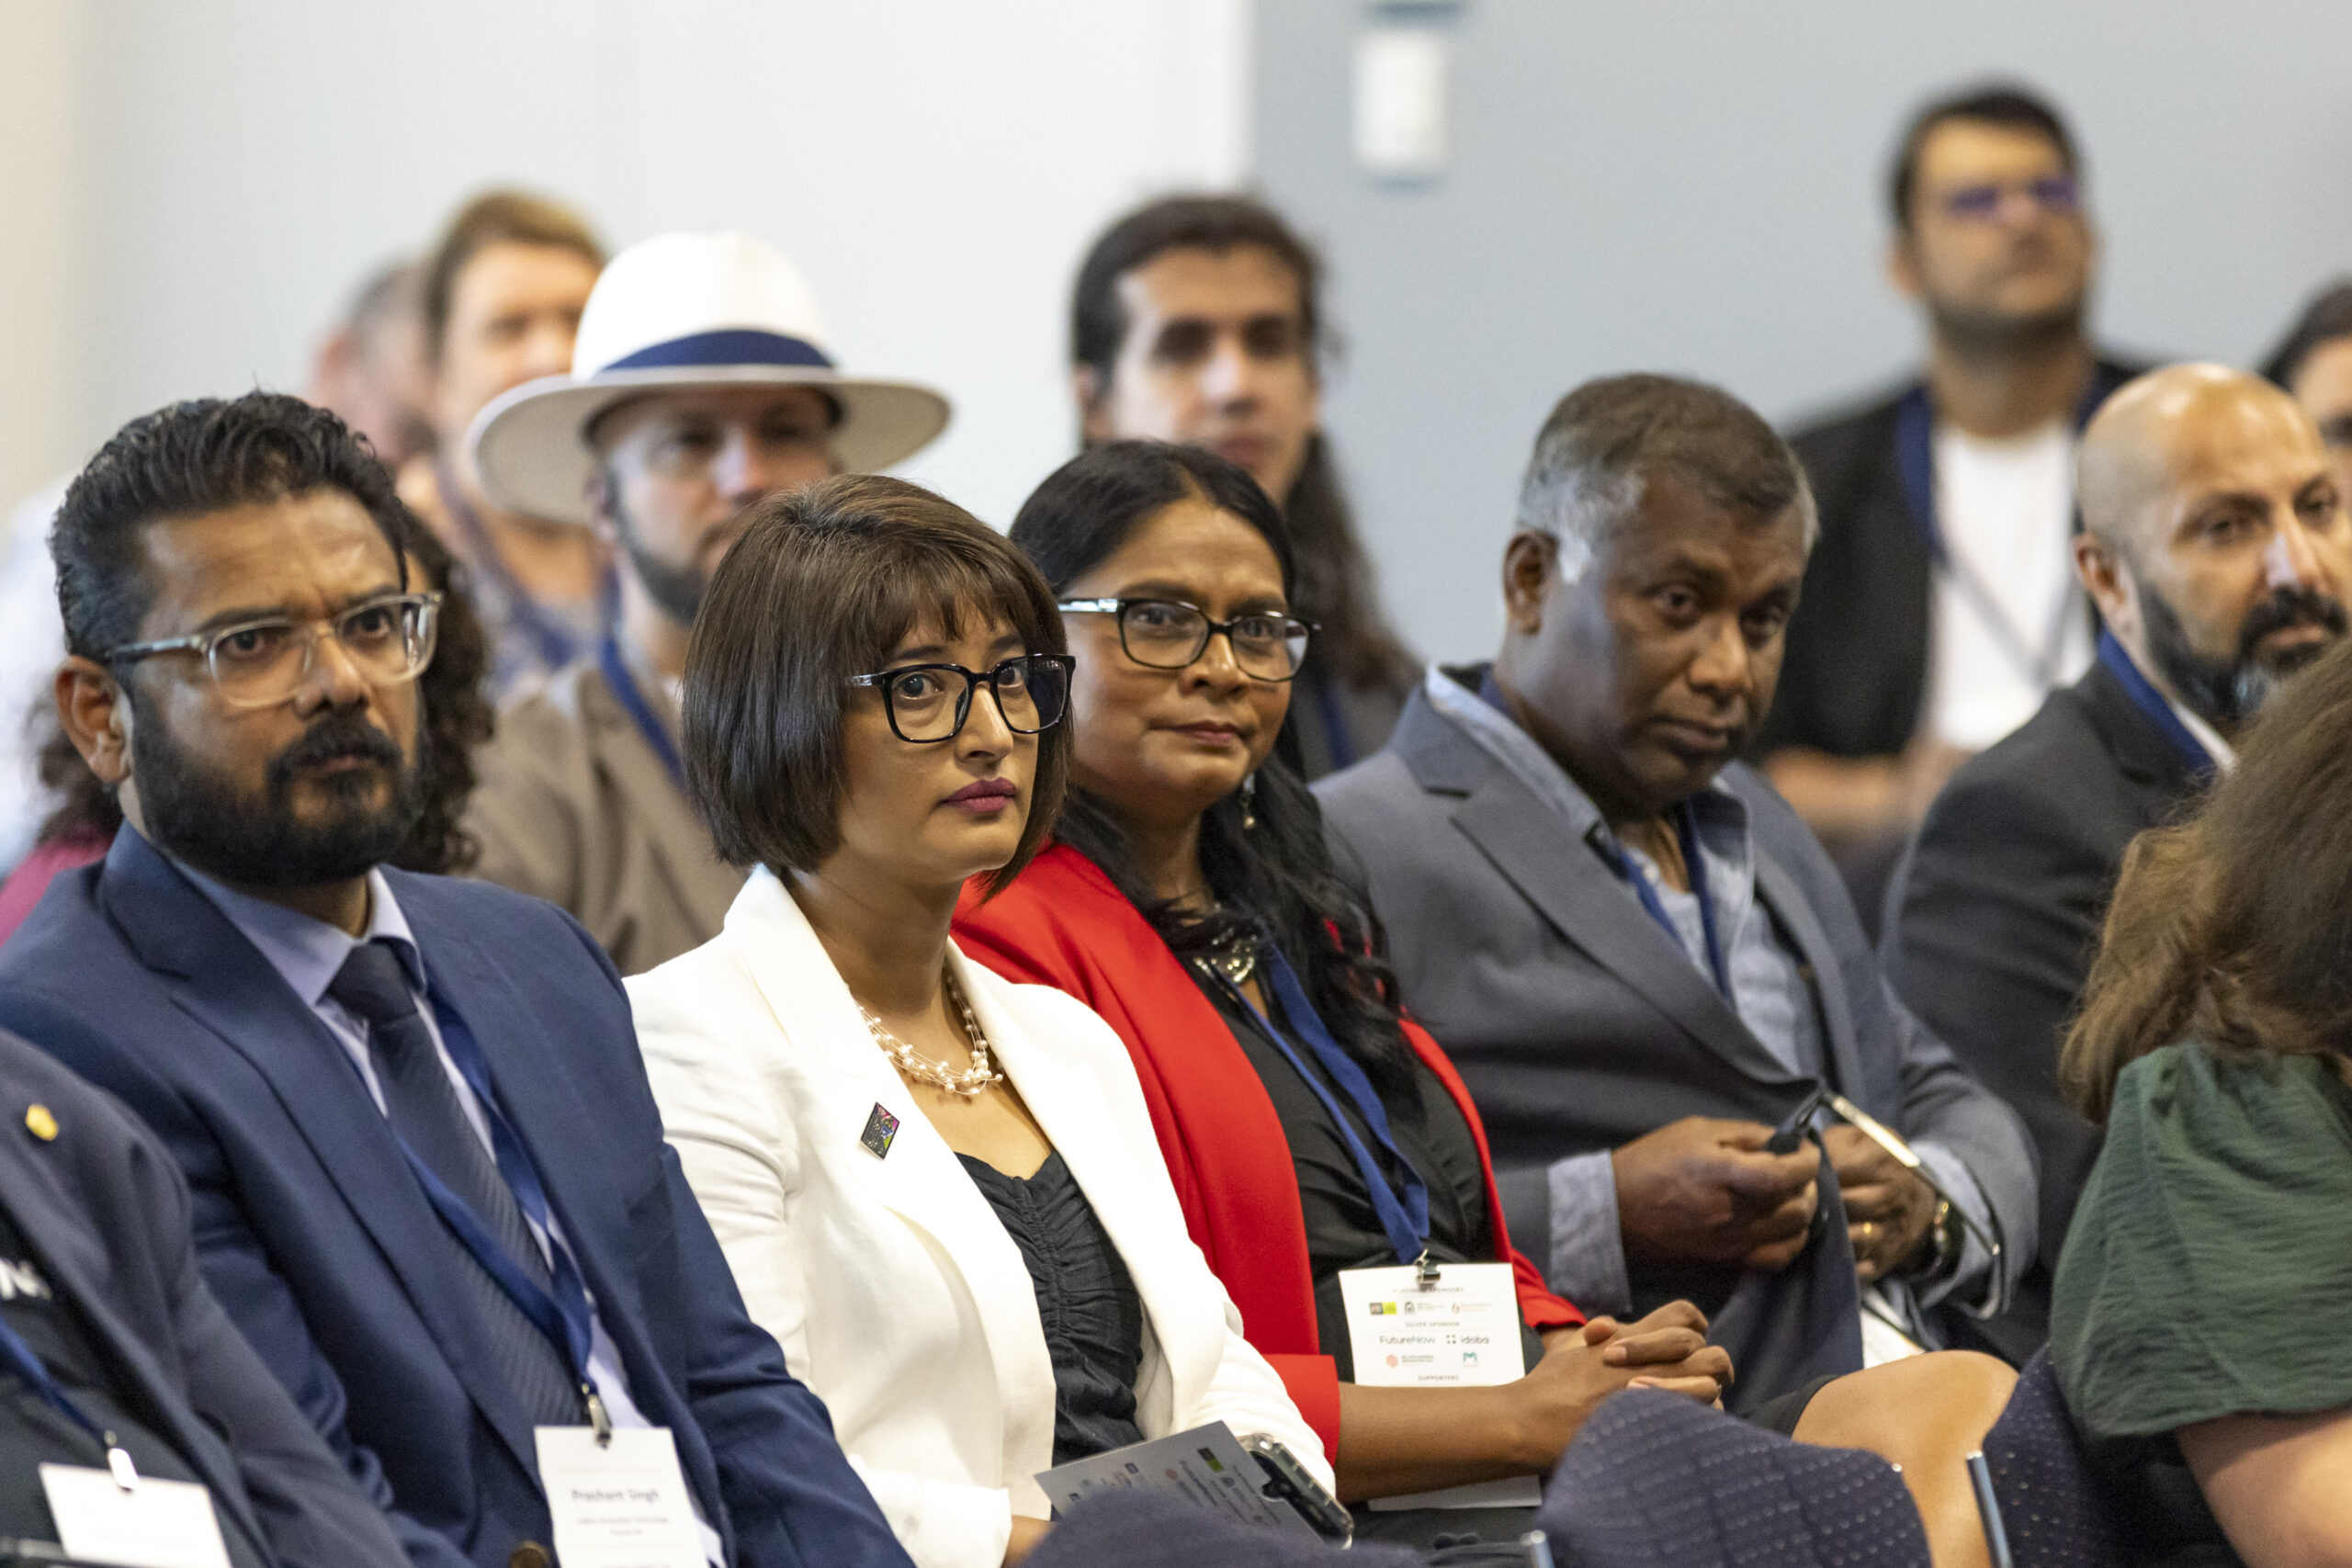 Audience during a panel discussion